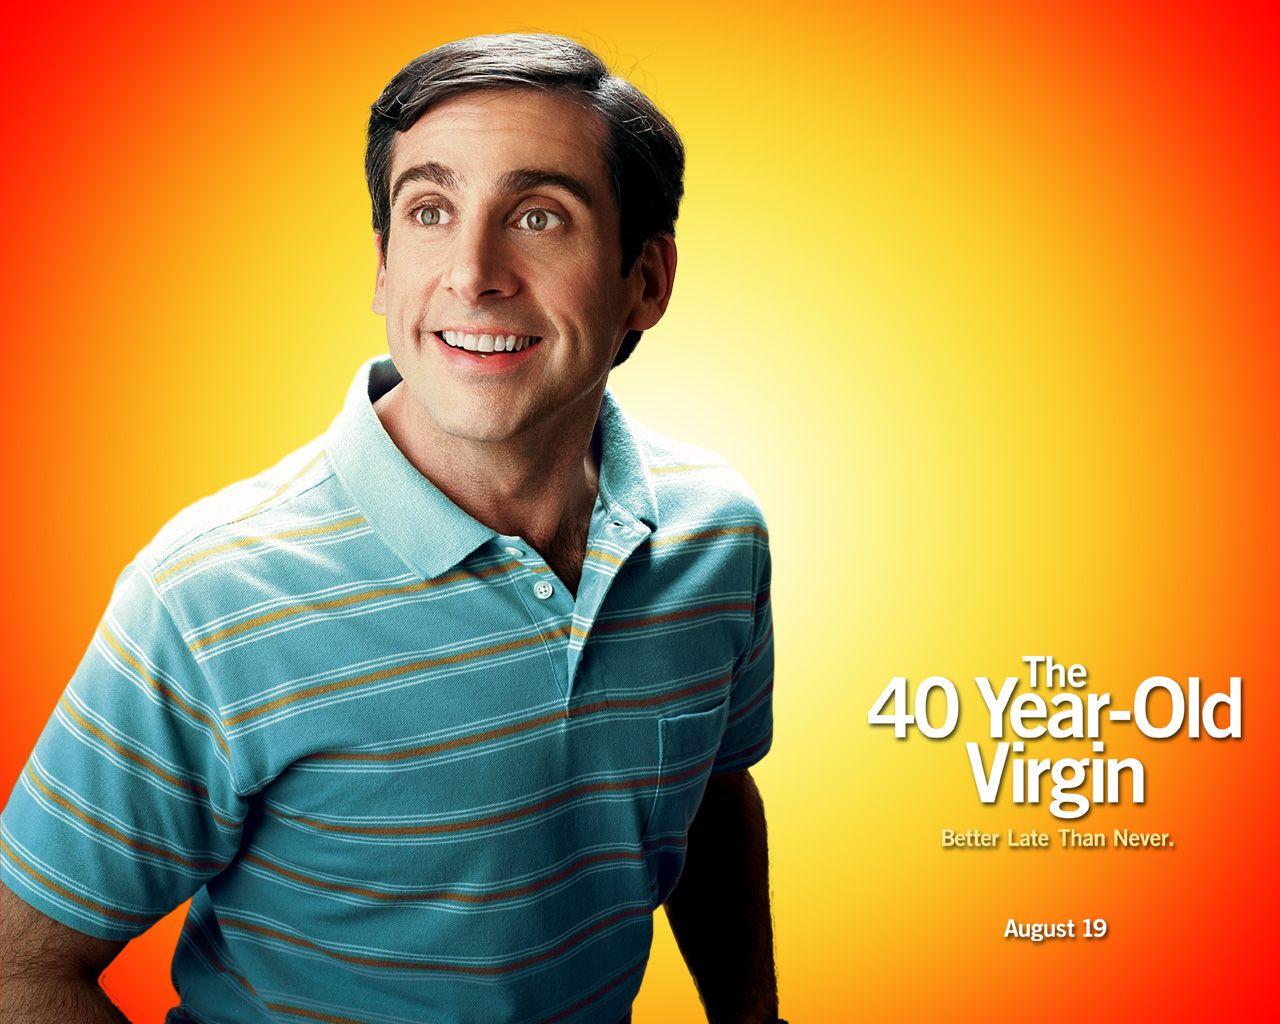 Steve Carell Carell In The 40 Year Old Virgin Wallpaper 3